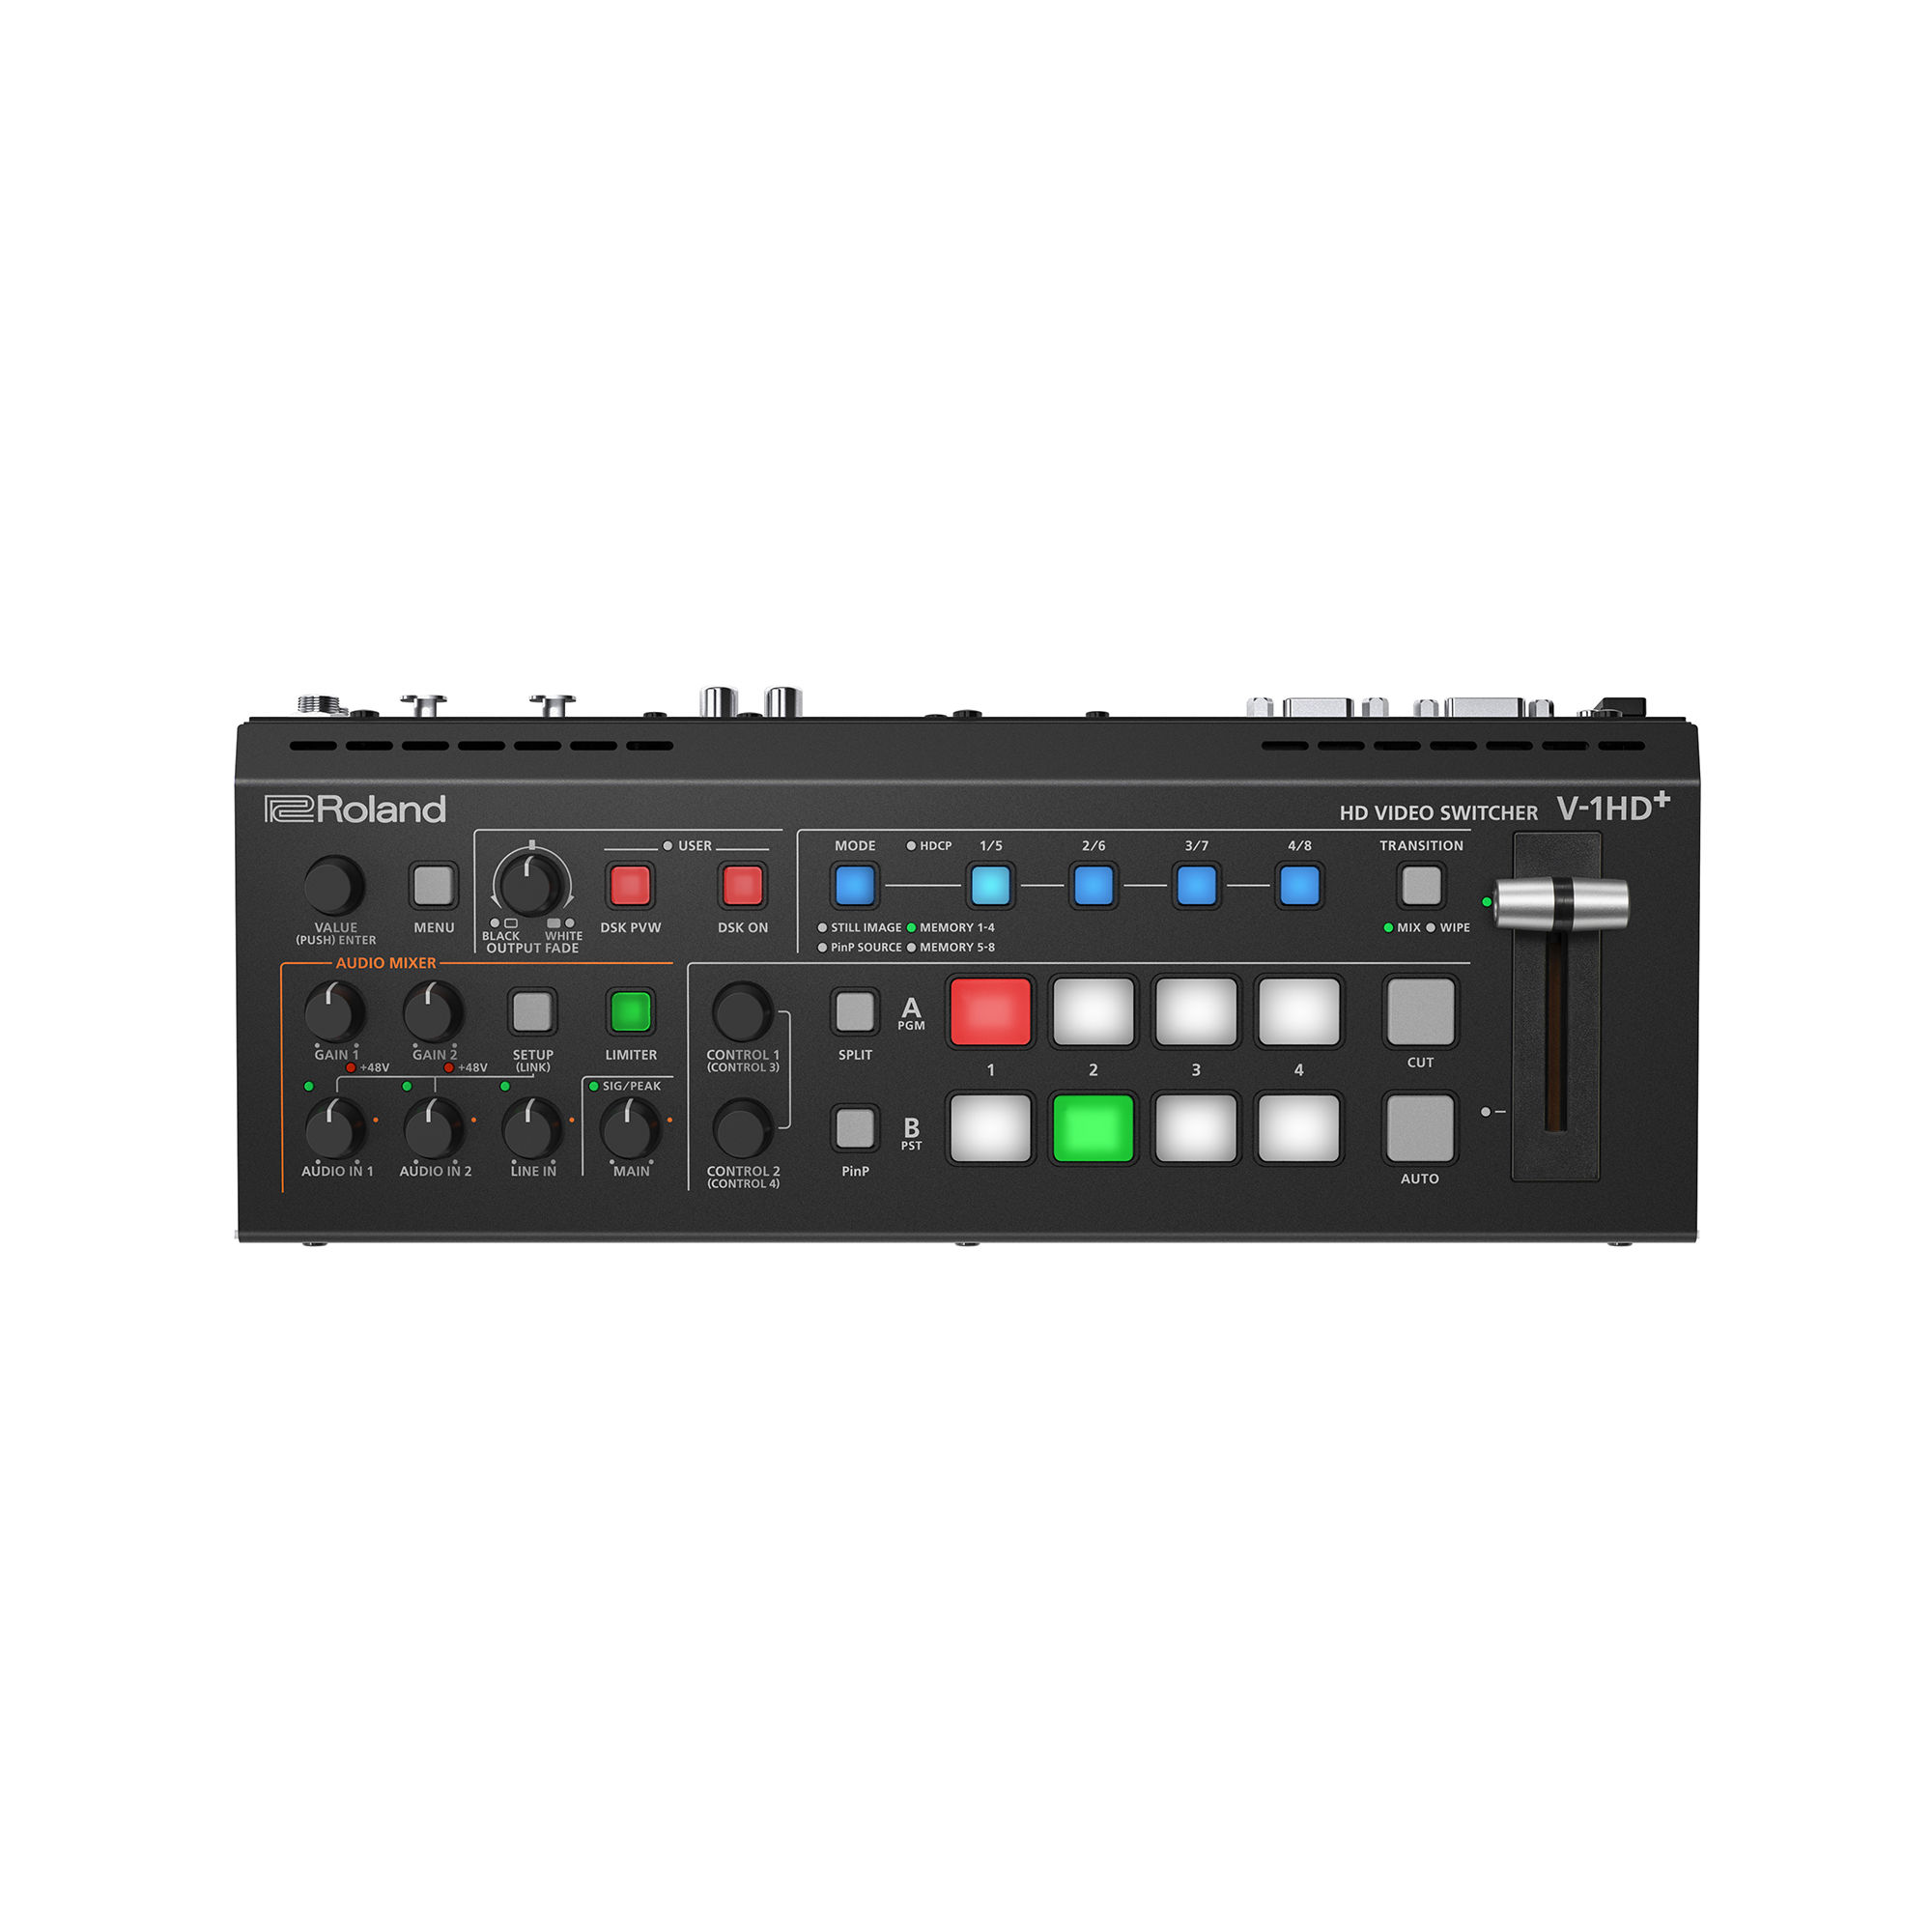 ROLAND V-1HD+ COMPACT & PORTABLE 4xHDMI VIDEO SWITCHER